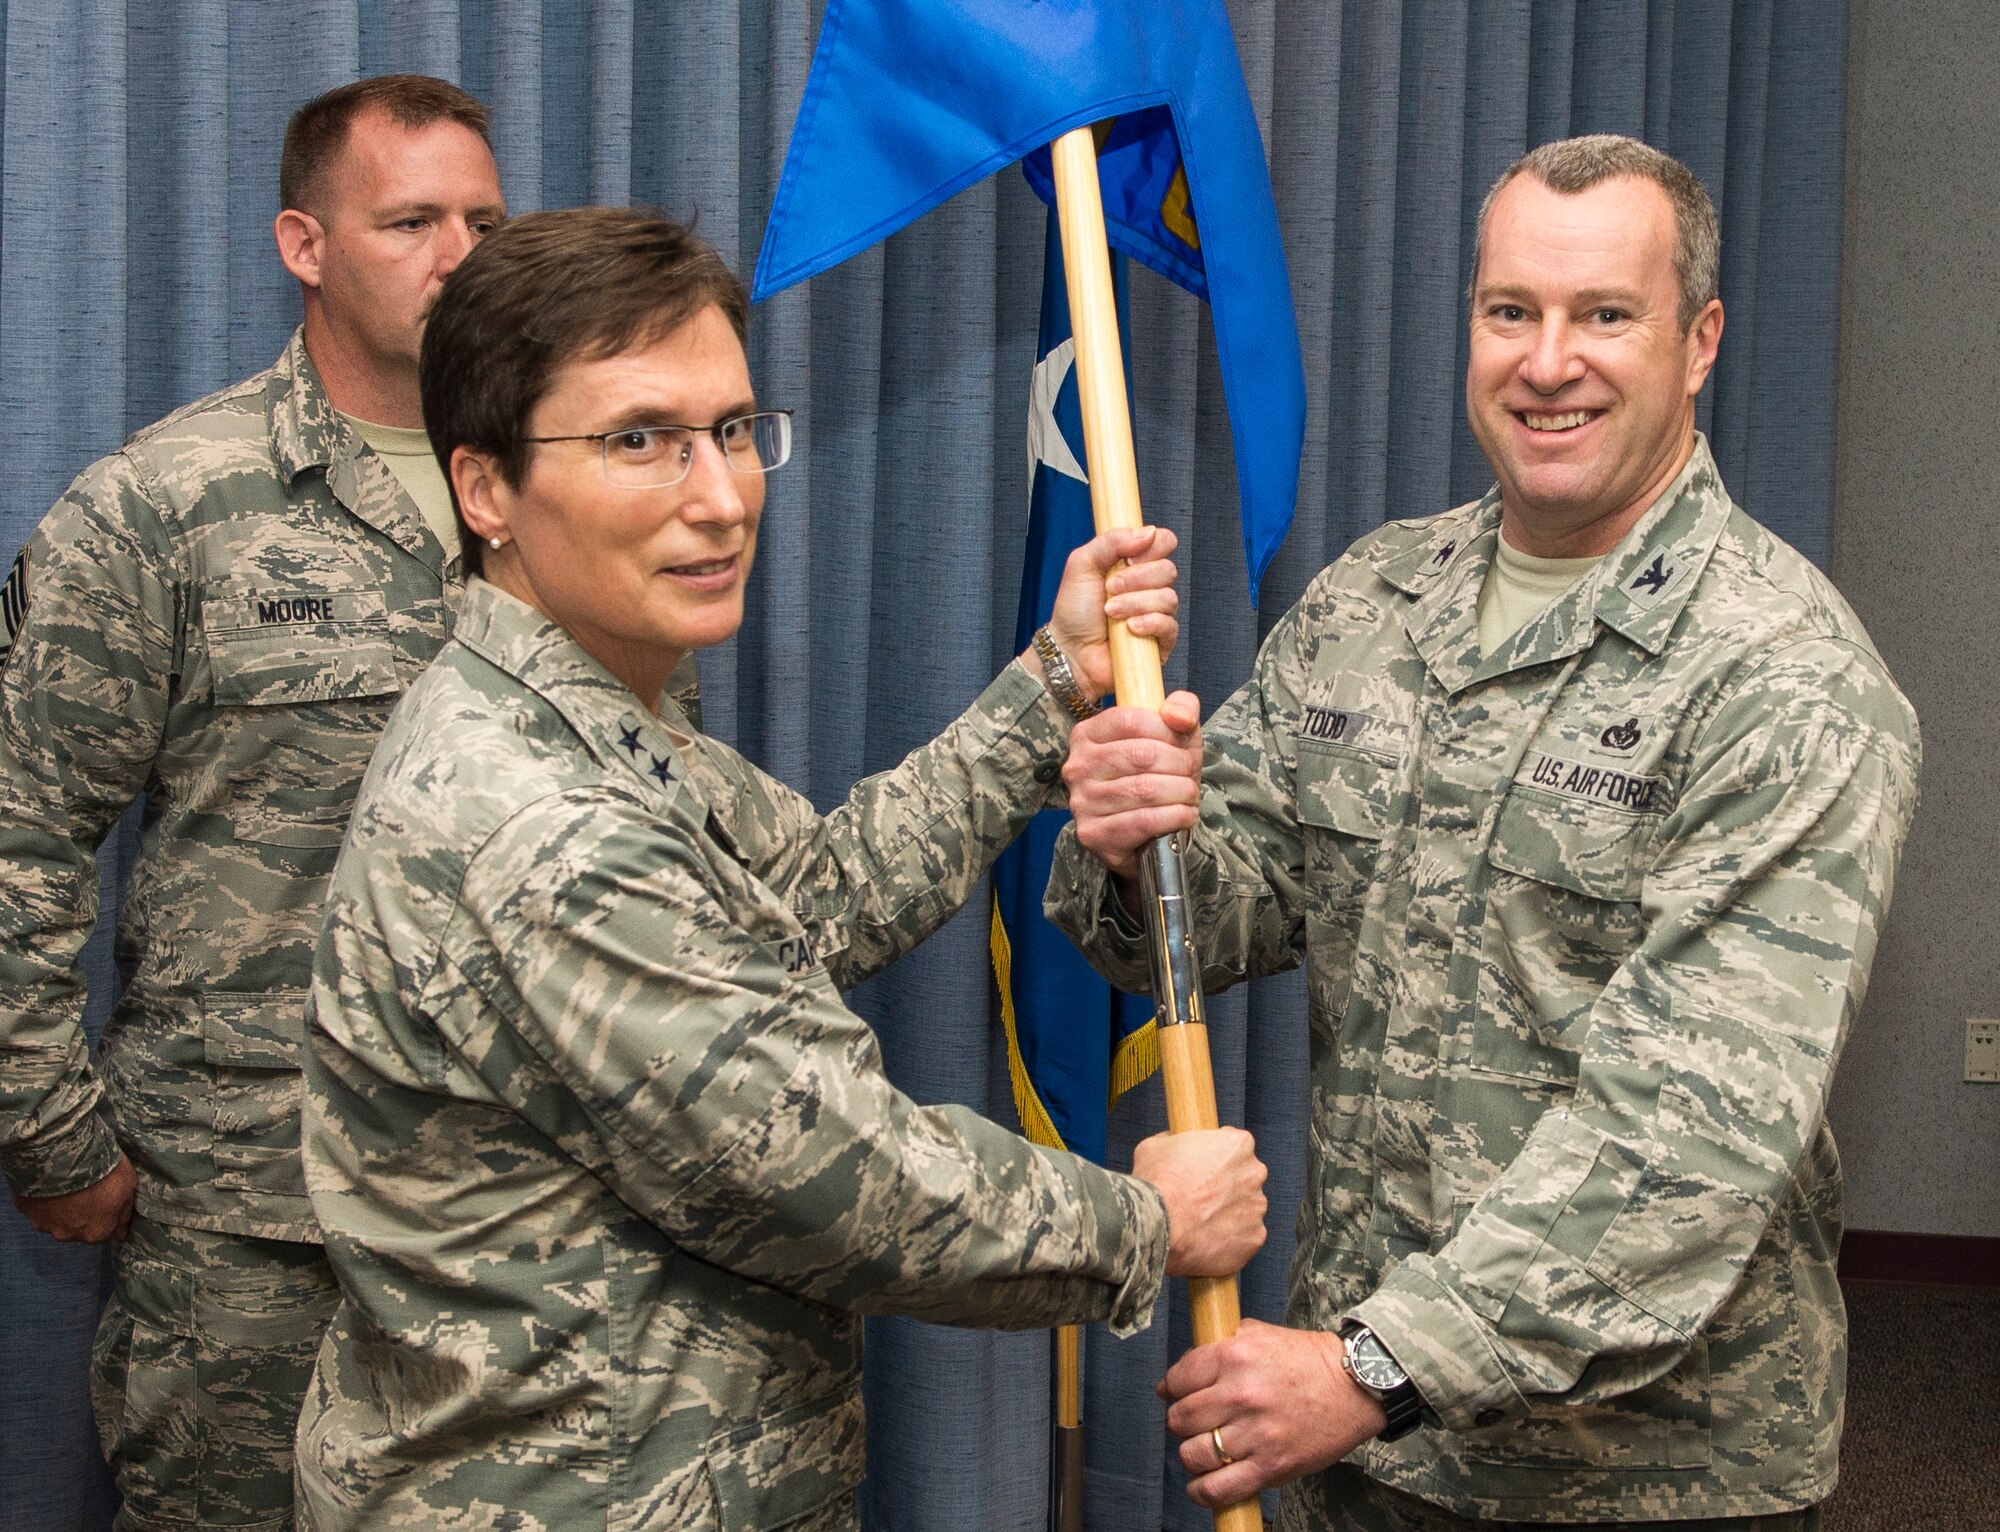 Col. Jeffrey Todd assumes command of Air Force Installation and Mission Support Center Detachment 6 from Maj. Gen. Theresa Carter, AFIMSC commander, during a ceremony at Wright-Patterson Air Force Base, Ohio, May 26, 2015. Todd will serve as the interim commander of Detachment 6, which is the last of 10 AFIMSC detachments to be activated across the Air Force. (U.S. Air Force photo/Wesley Farnsworth)